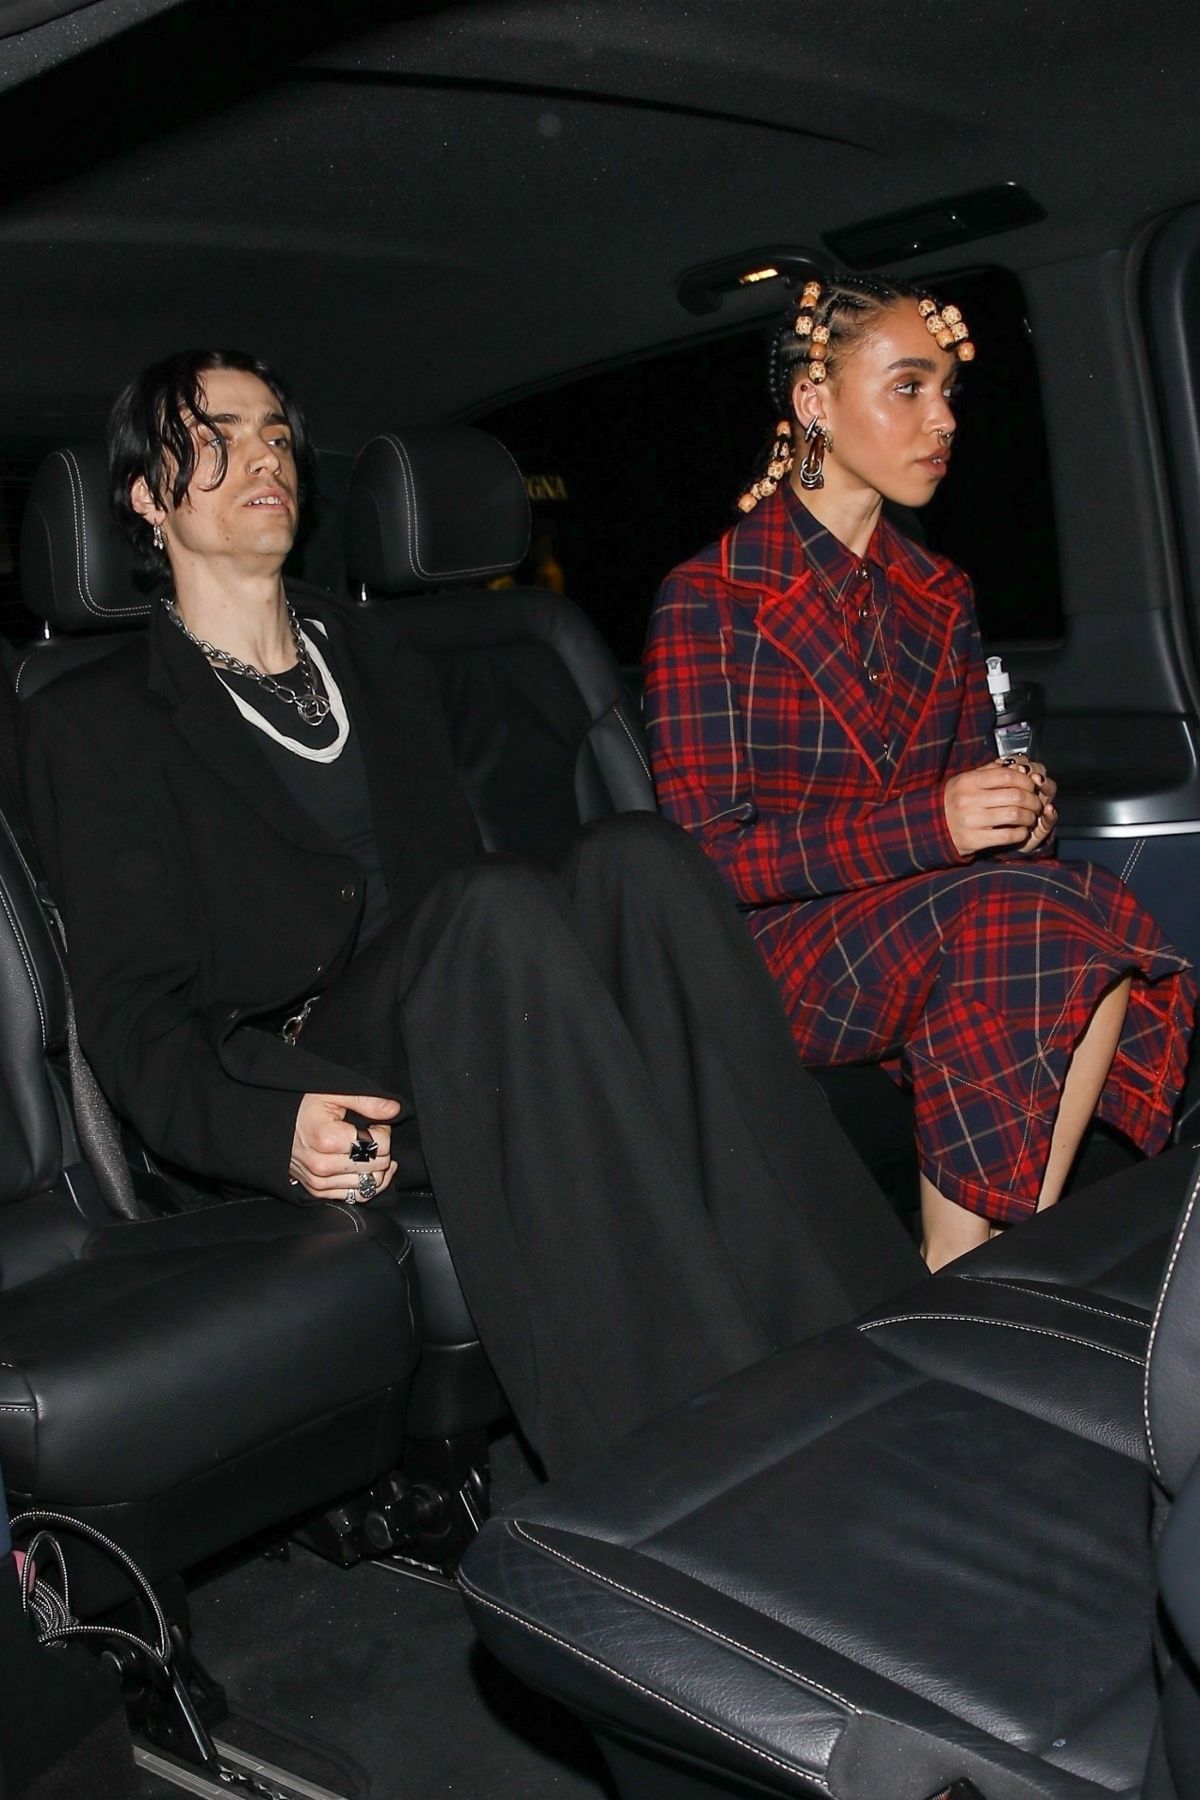 FKA TWIGS and a Mystery Male Leaves Louis Vuitton Afterparty in Paris ...